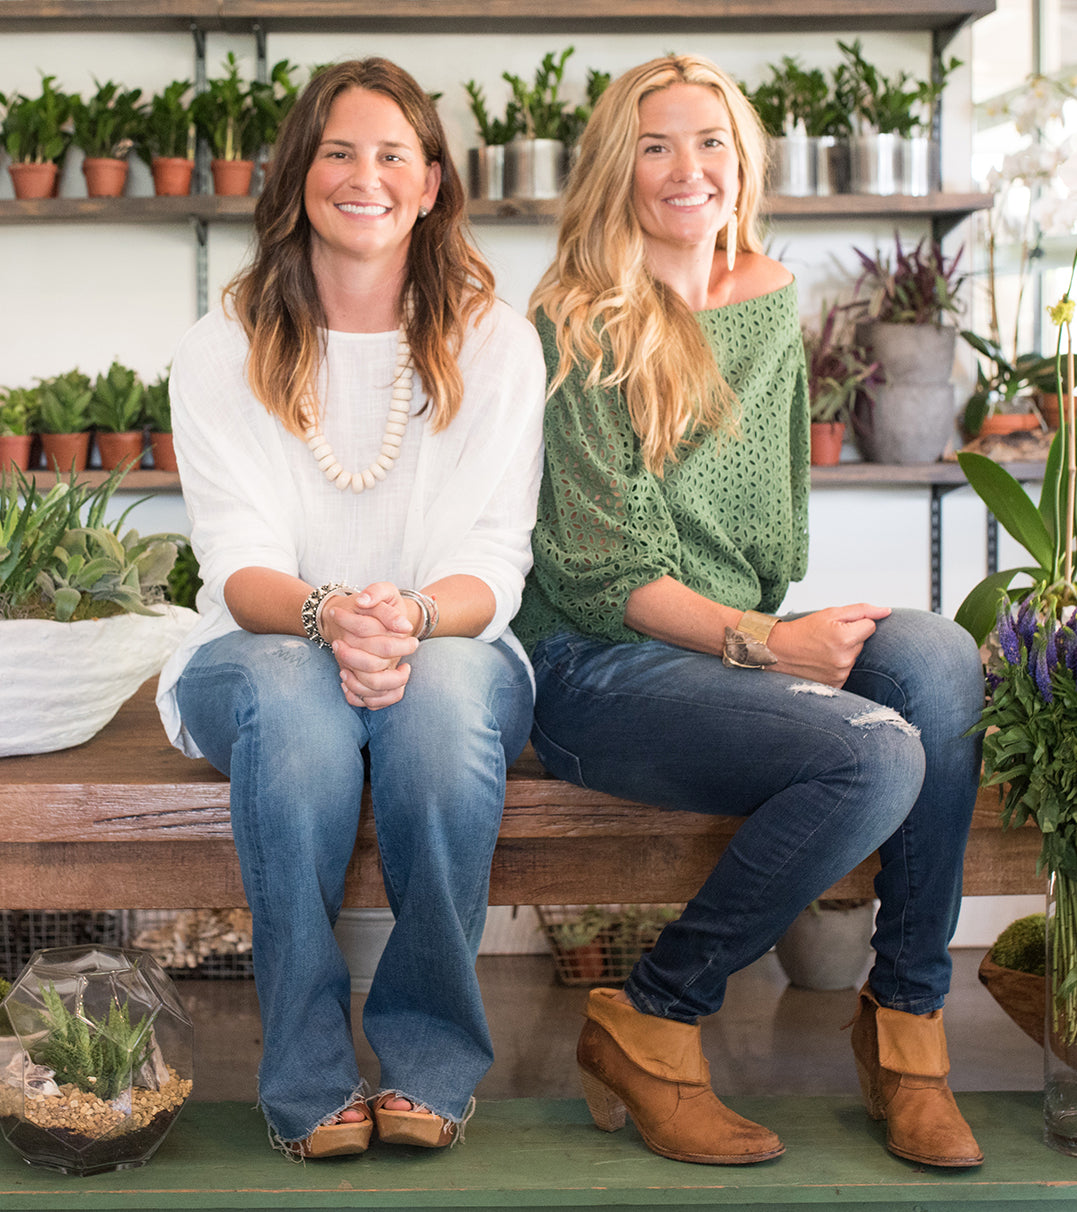 Hostess with the Mostess: Founders of The Vine